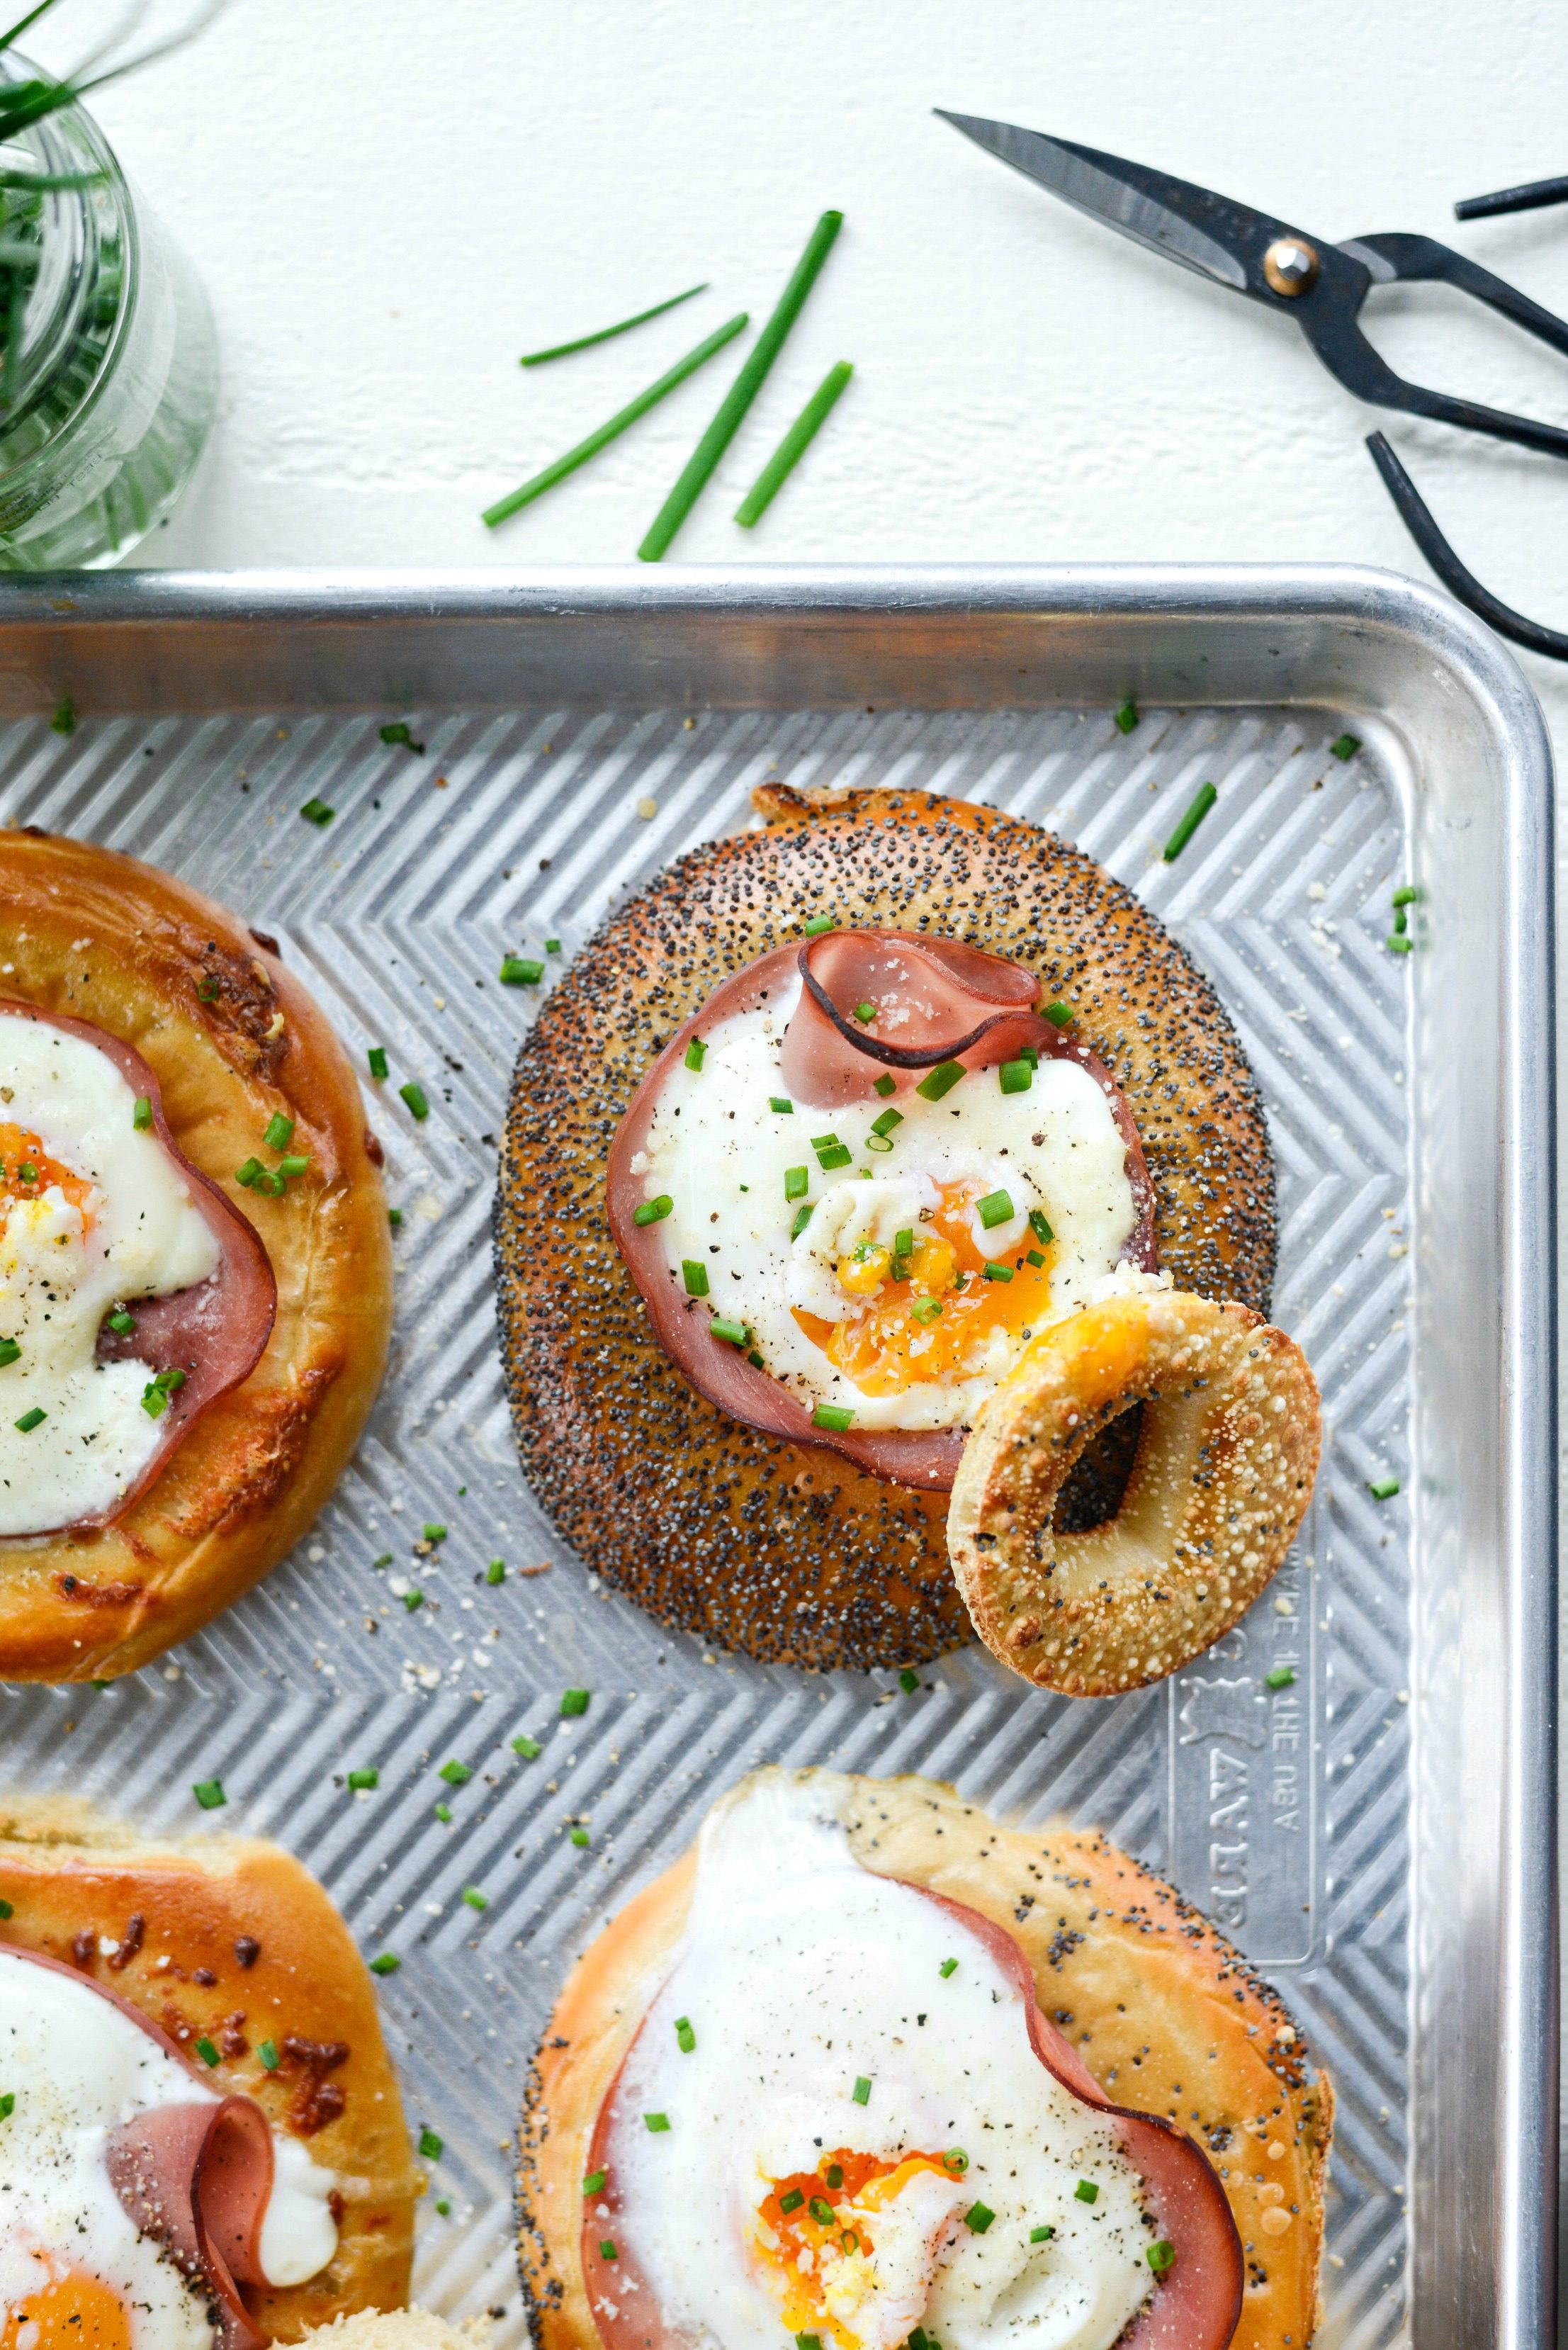 Sheet Pan Bagel Eggs — Gather In Style